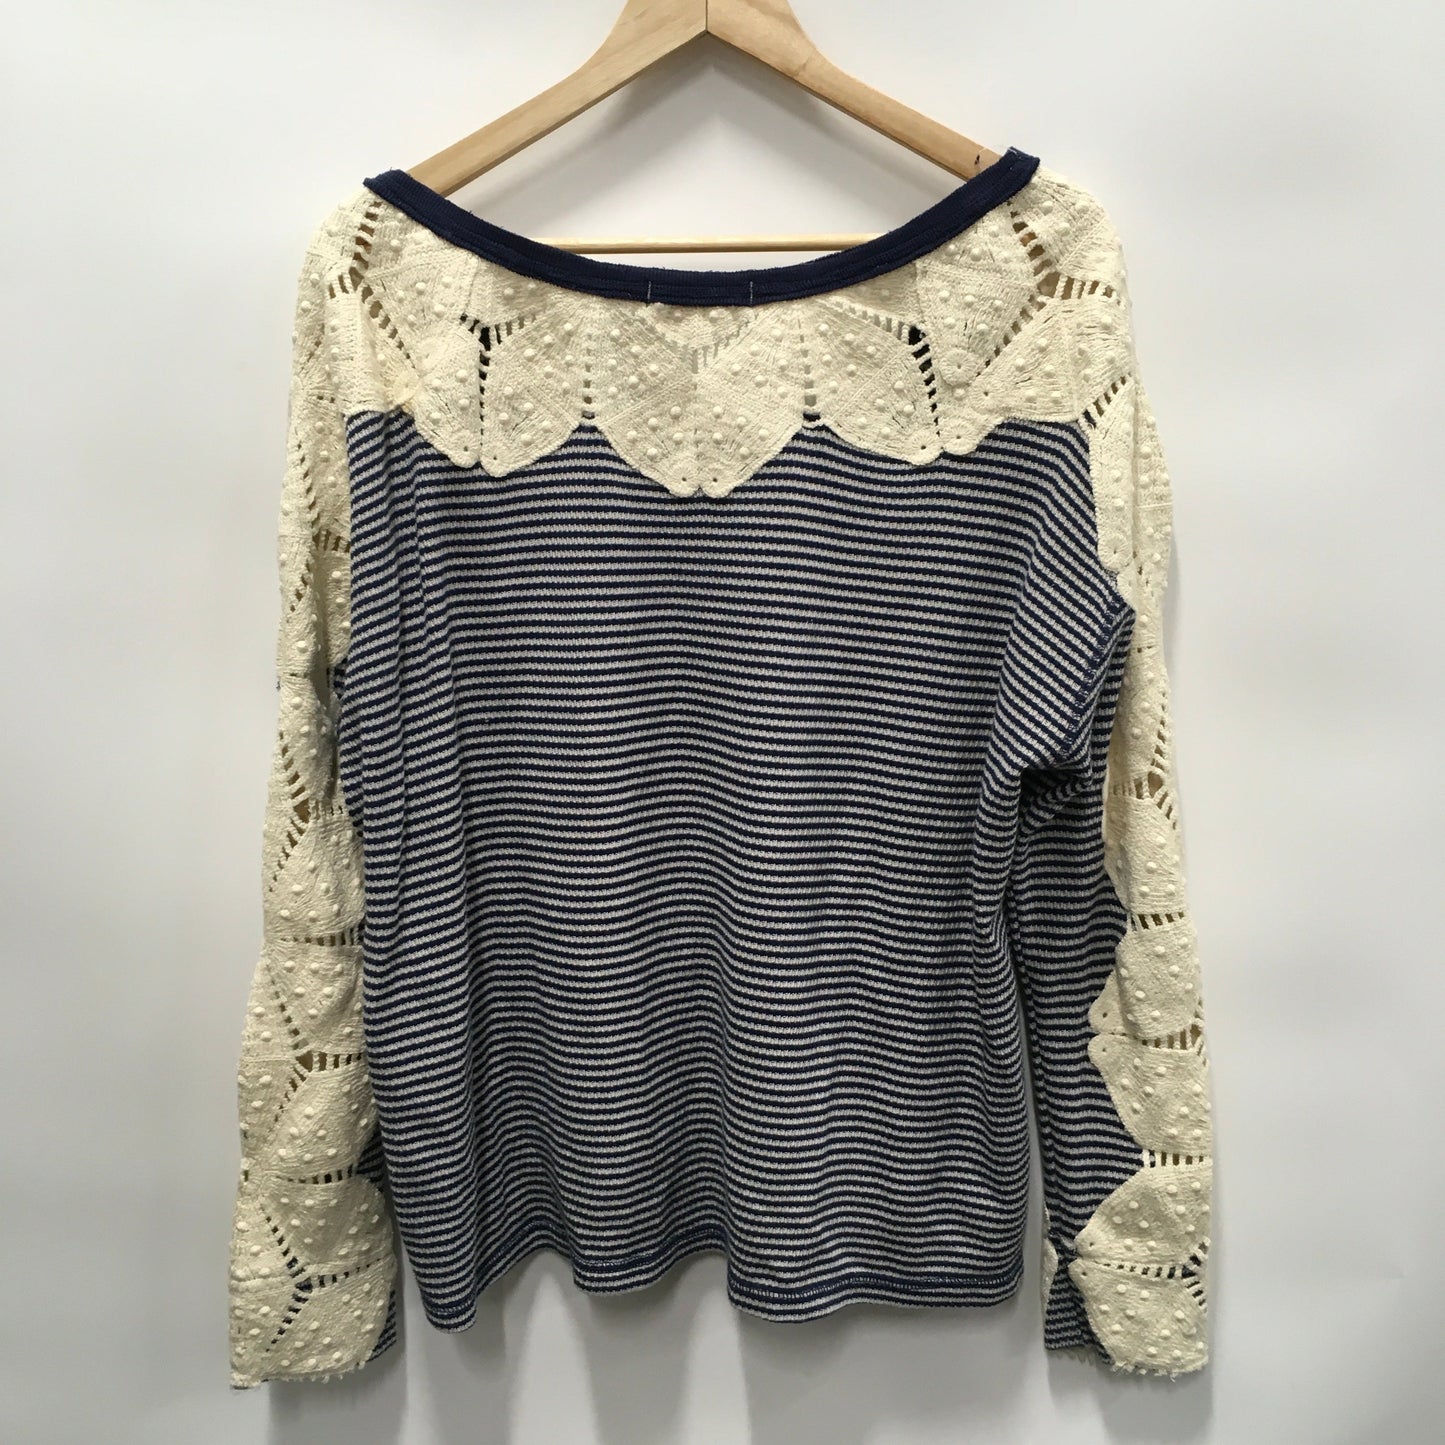 Striped Pattern Sweater We The Free, Size M